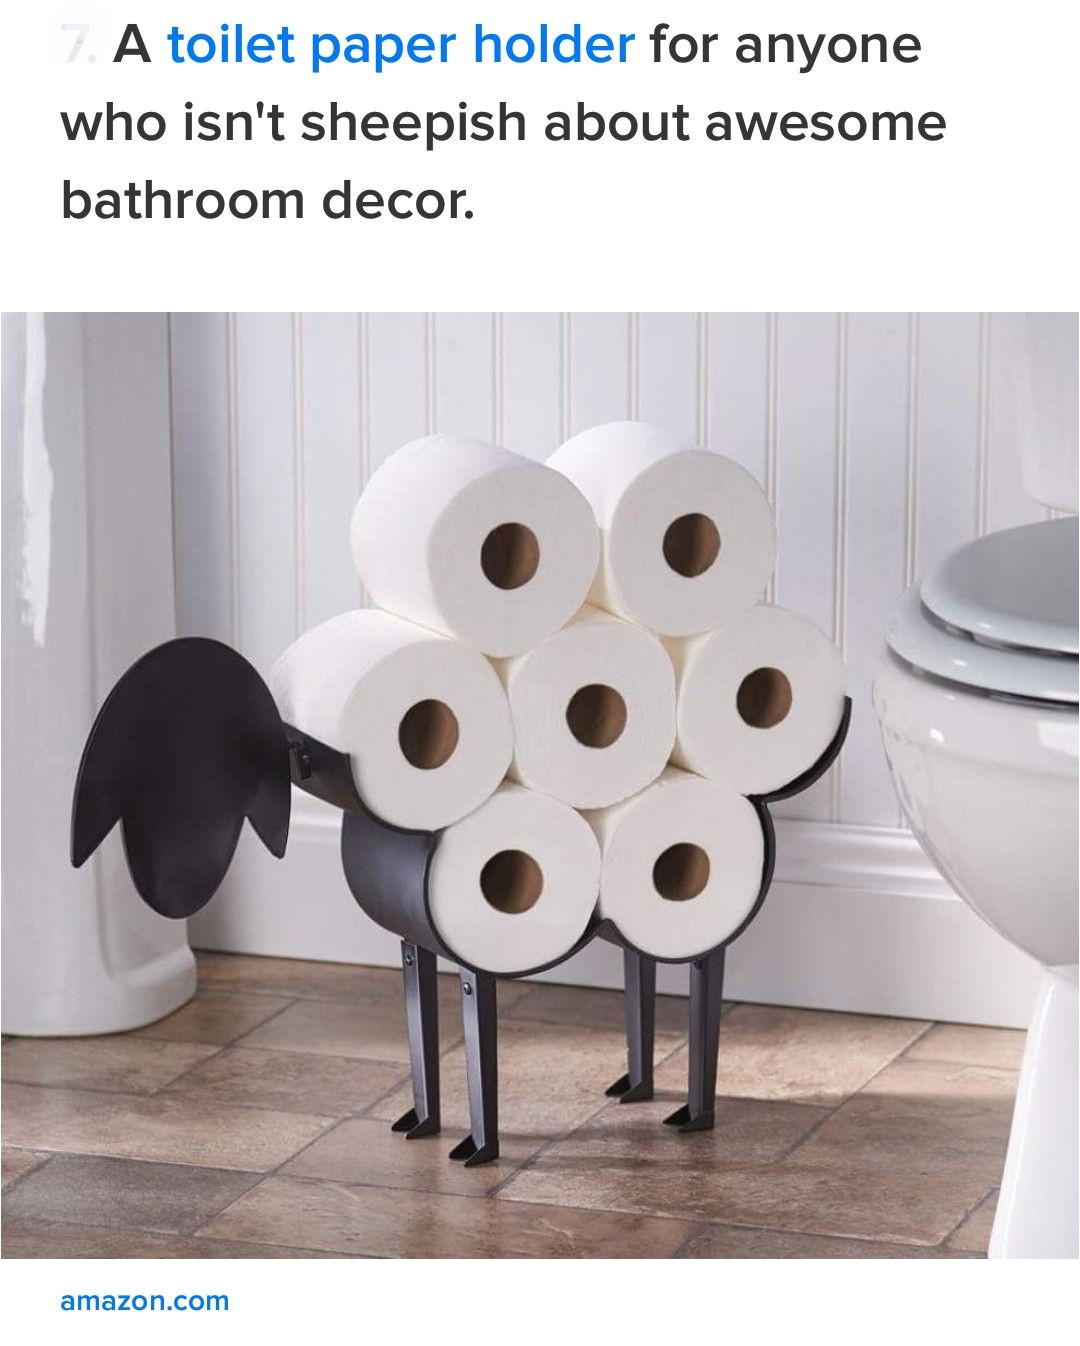 awesome sheep toilet paper holder